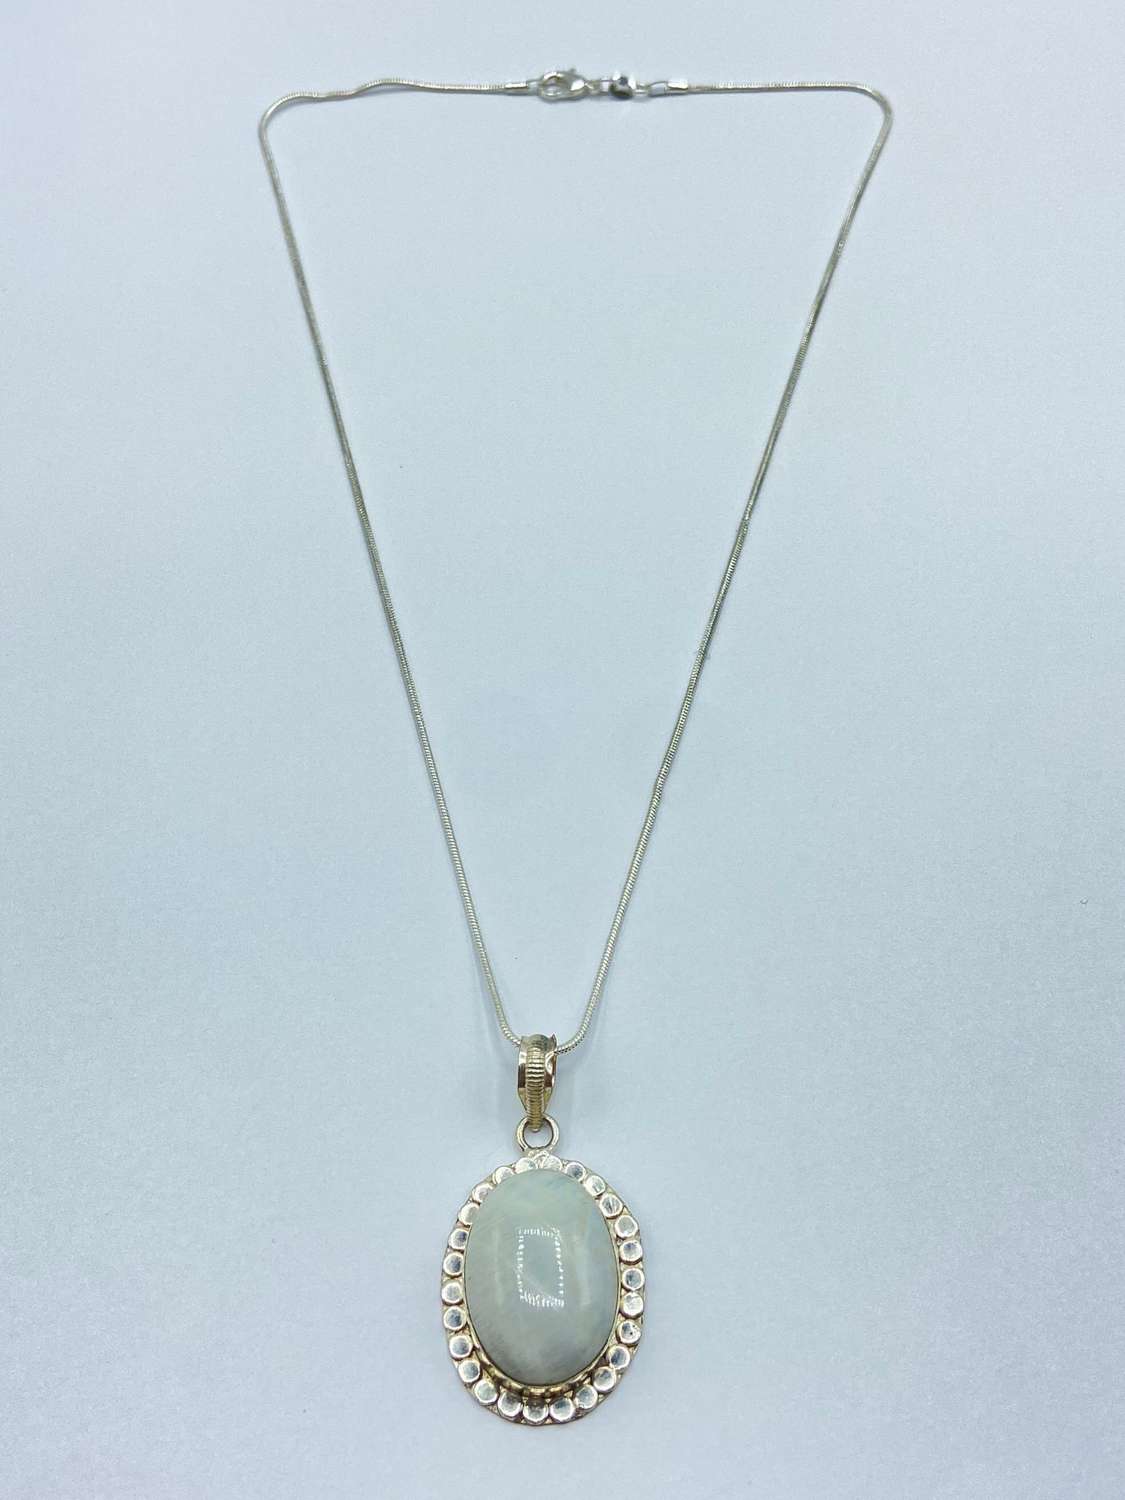 Beautiful Vintage Sterling Silver & Cabochon Moonstone Necklace